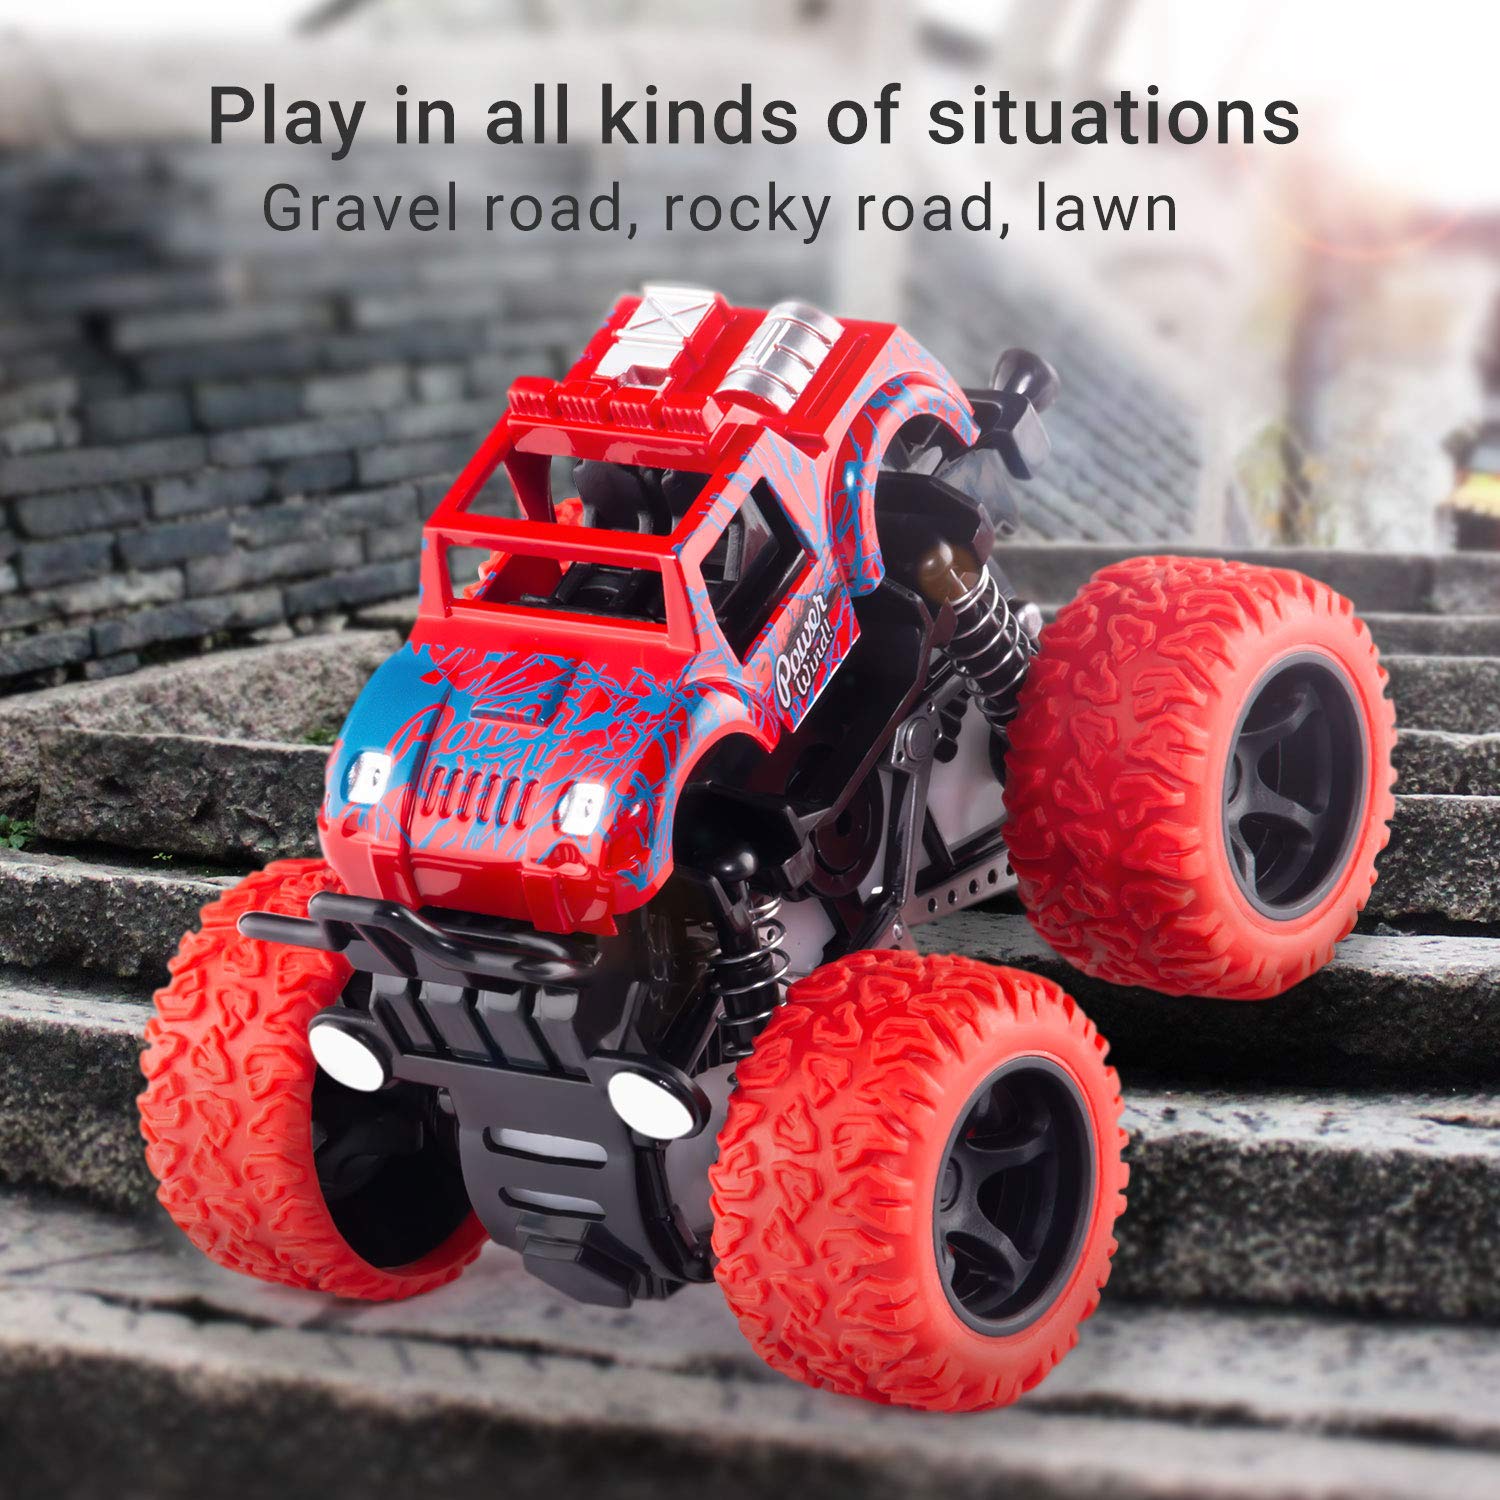 Monster Truck Toys - Friction Powered Toy Cars Push and Go Vehicles for Kids Best Christmas Birthday Party Gift for Boys Girls Aged 3 and Above 4-Pack